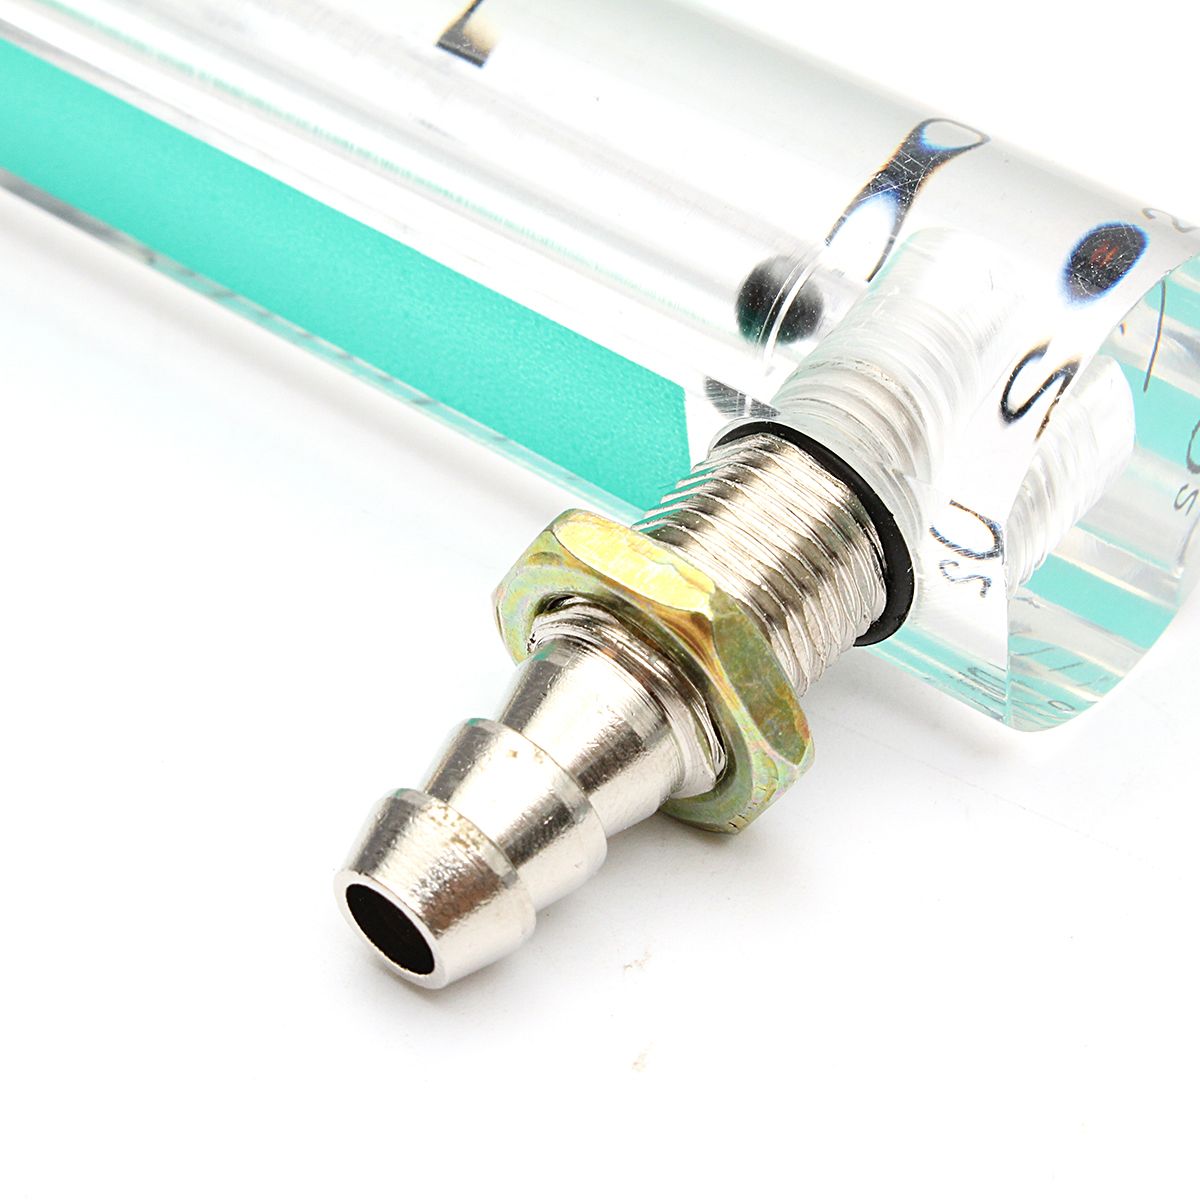 LZQ-2-0-3LPM-93mm-Acrylic-Gas-Air-Oxygen-Flow-Meter-with-Control-Valve-Metal-Connector-1085724